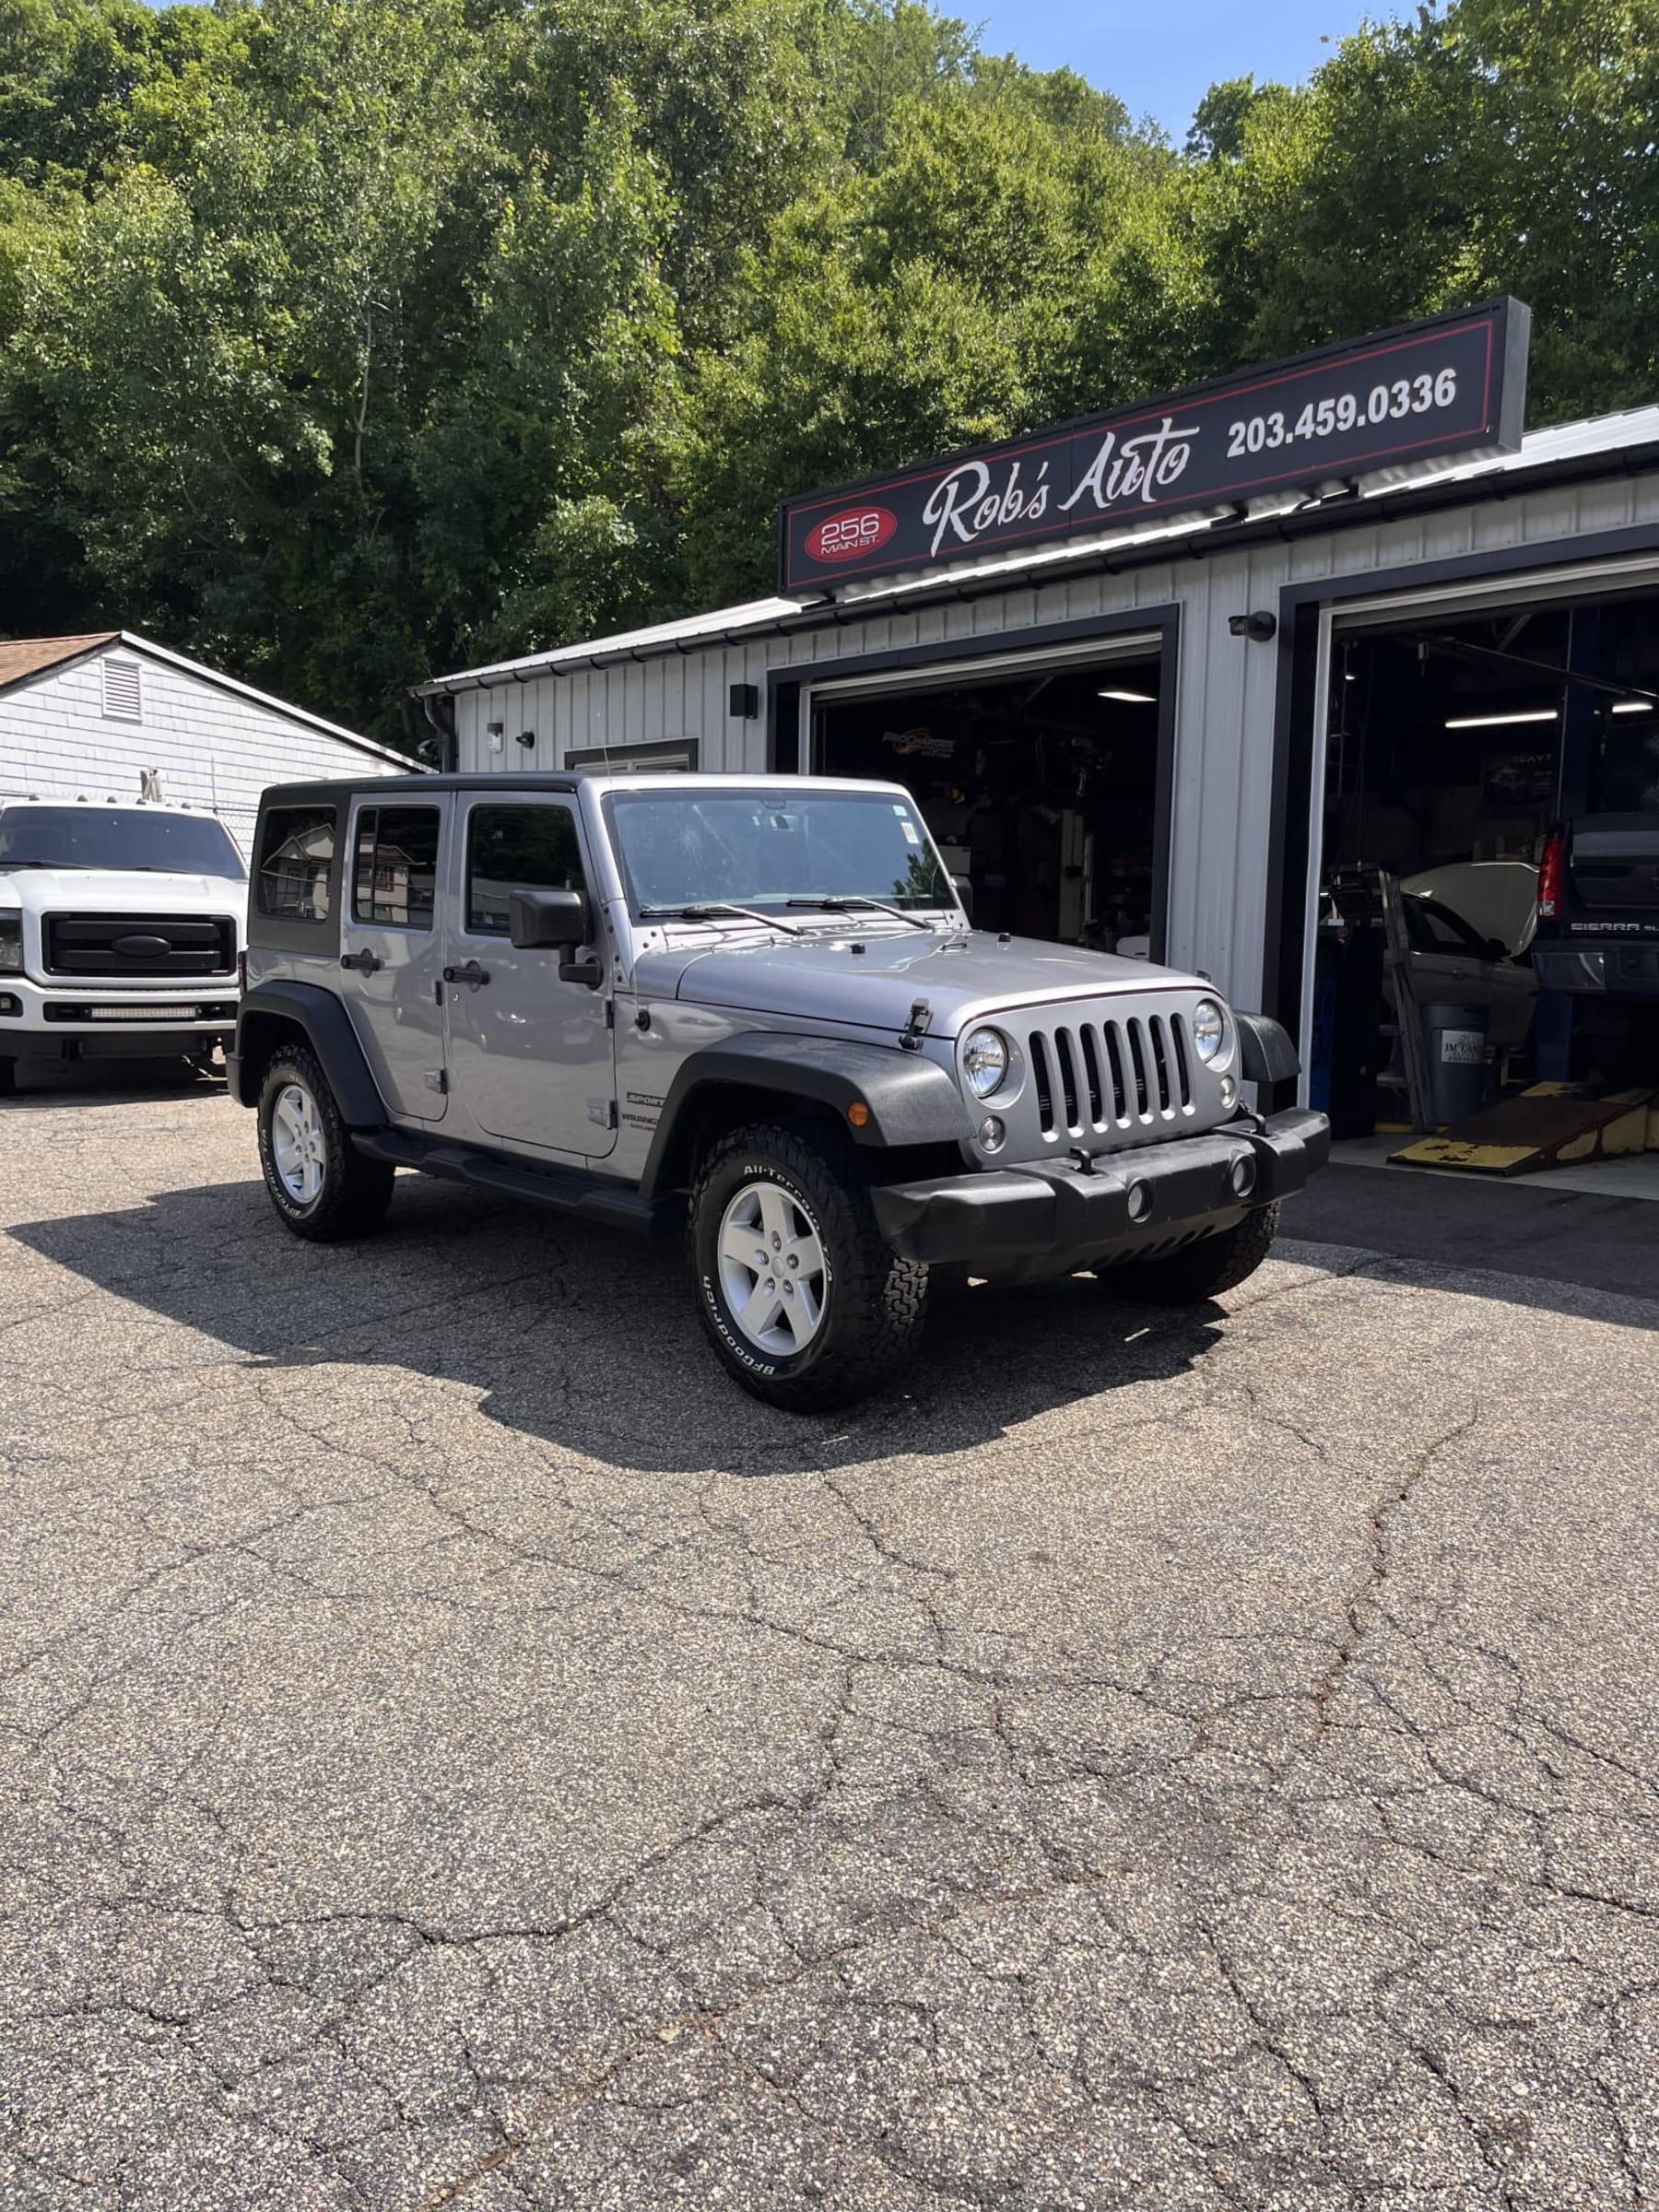 NEW ARRIVAL!! 2017 Jeep Unlimited Sport S!! One owner car!! ONLY 52k miles!! Freedom hardtop, remote start, heated seats, Bluetooth and much more!! Won’t last at $23,900!!